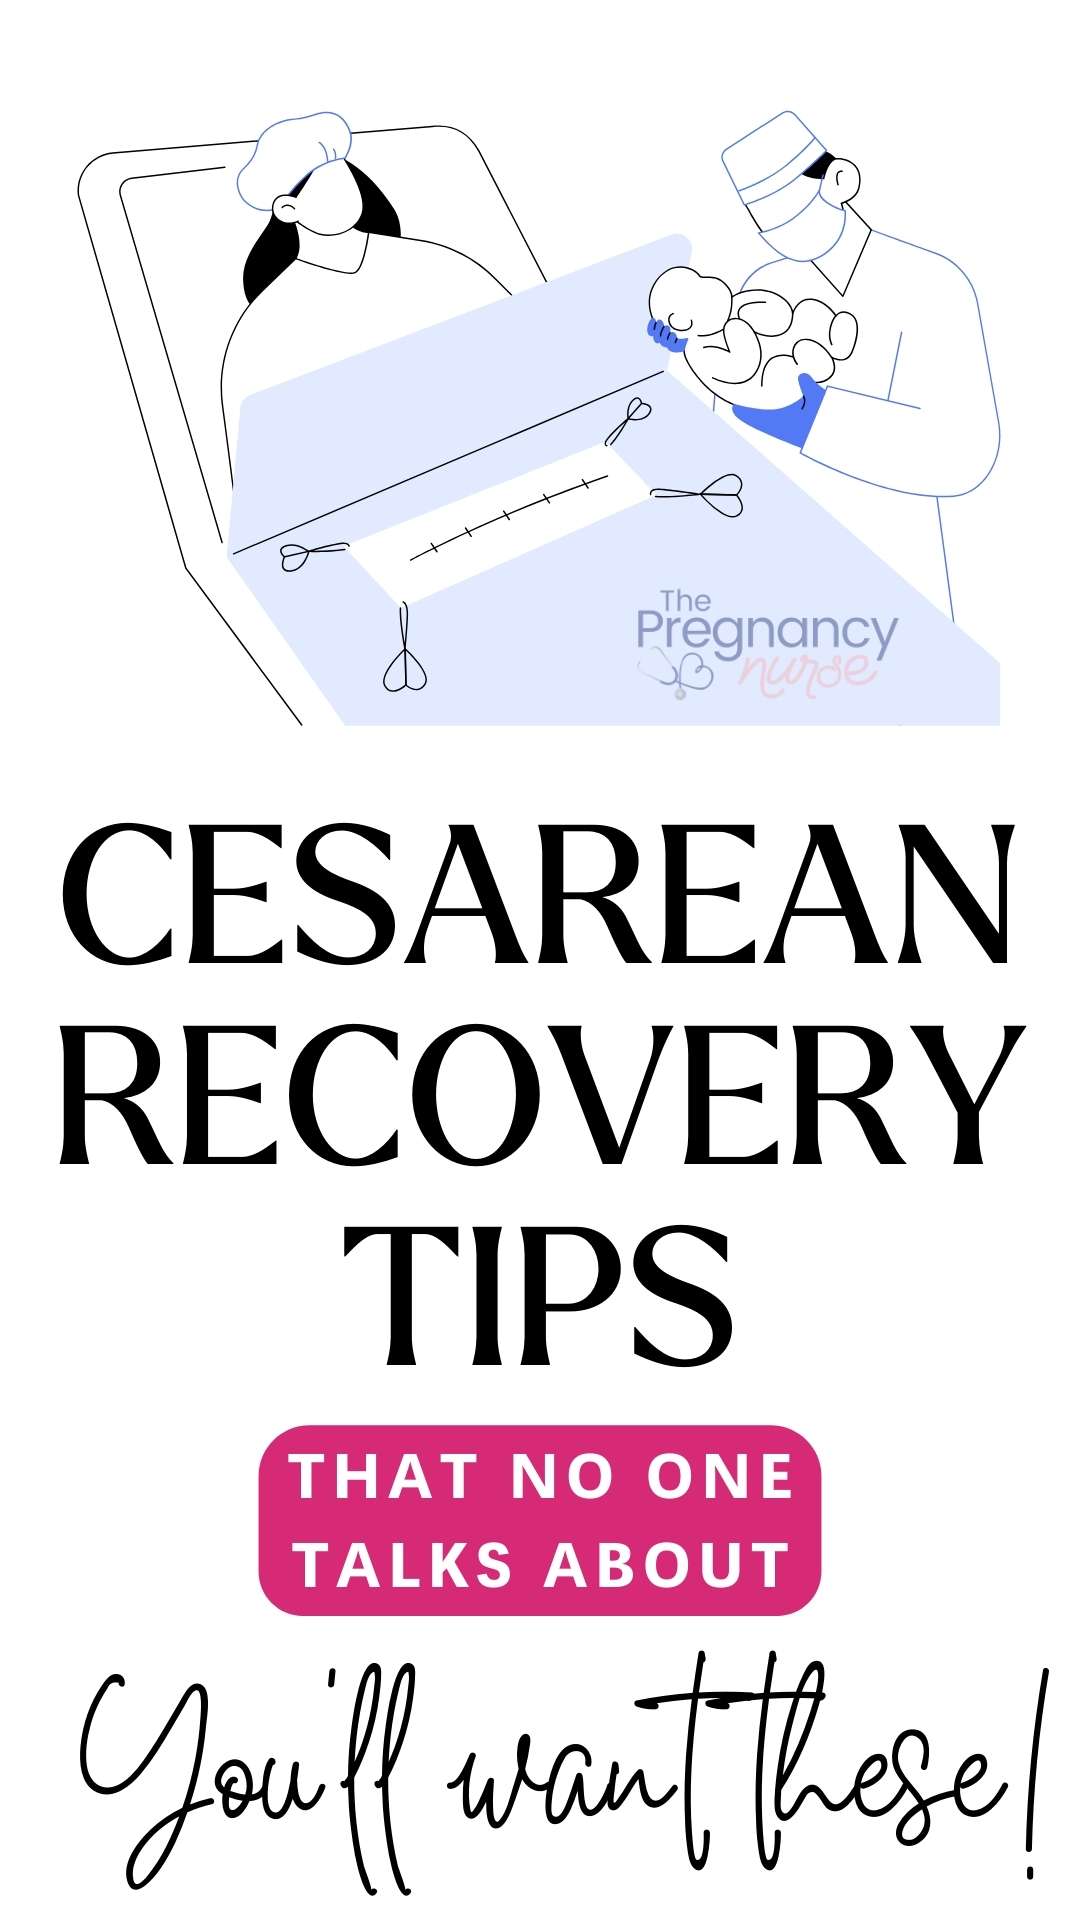 Spare unwanted trials with our comprehensive guide to c-section recovery. Covering bowel issues, scar care, post-surgery movement, and more, it's the ultimate resource to help you get back on track. Learn from experienced nurses and experts!